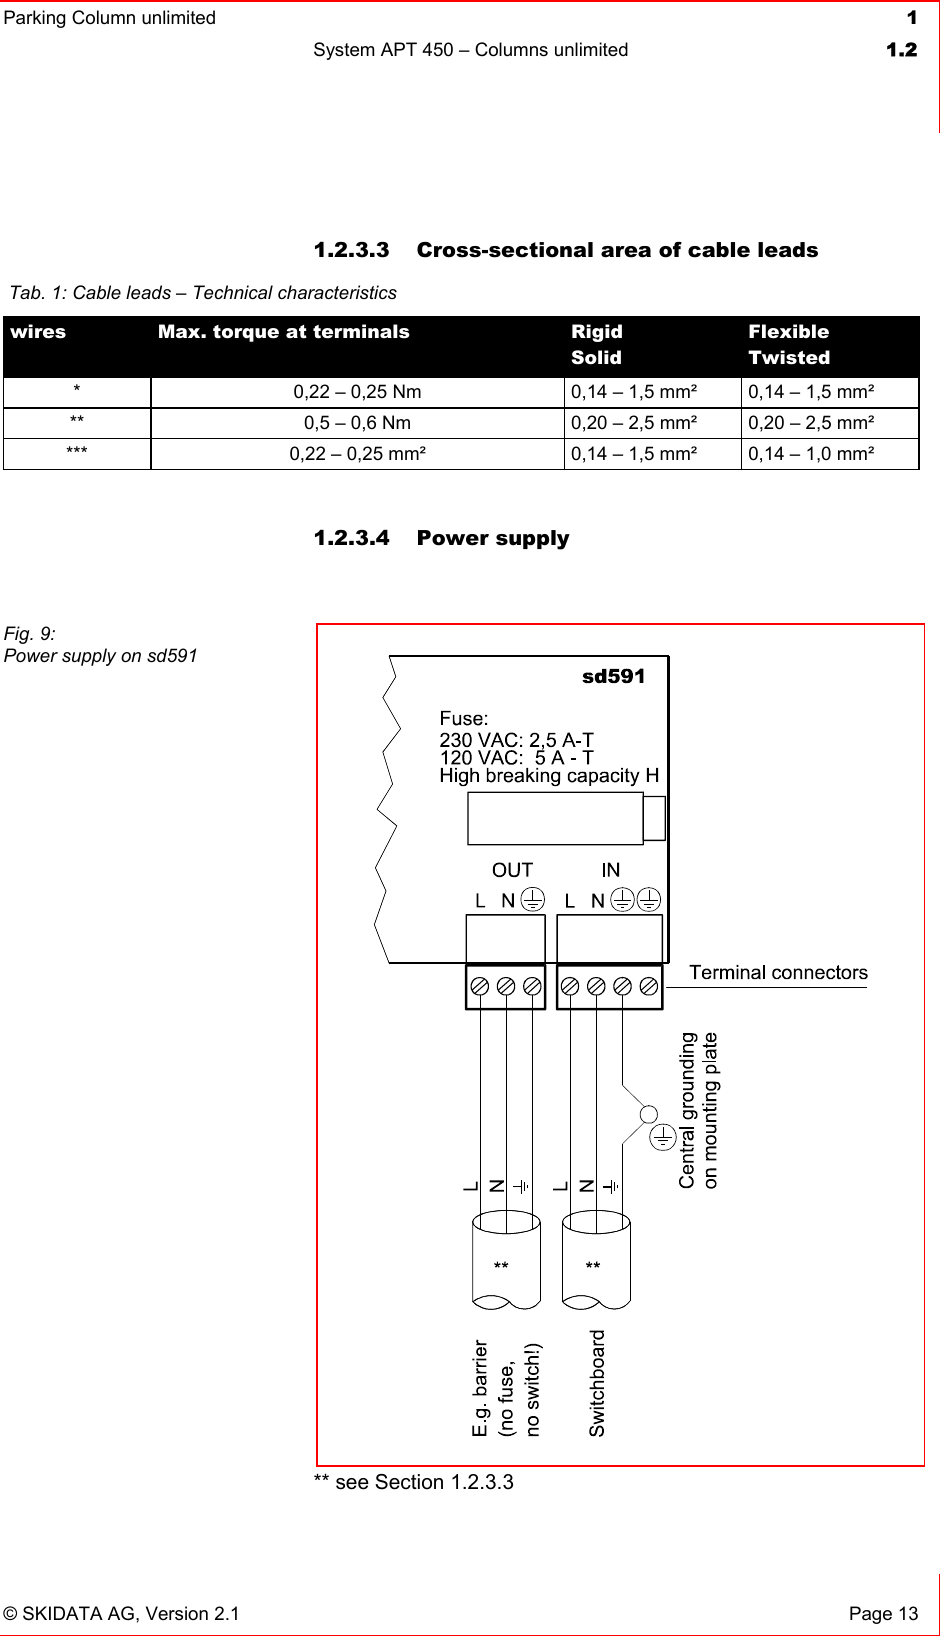 Parking Column unlimited  1System APT 450 – Columns unlimited  1.2© SKIDATA AG, Version 2.1  Page 13 1.2.3.3  Cross-sectional area of cable leads 1.2.3.4  Power supply  ** see Section 1.2.3.3  Tab. 1: Cable leads – Technical characteristics wires Max. torque at terminals  RigidSolidFlexibleTwisted*  0,22 – 0,25 Nm 0,14 – 1,5 mm²  0,14 – 1,5 mm² **  0,5 – 0,6 Nm 0,20 – 2,5 mm²  0,20 – 2,5 mm² ***  0,22 – 0,25 mm²  0,14 – 1,5 mm²  0,14 – 1,0 mm² Fig. 9: Power supply on sd591 